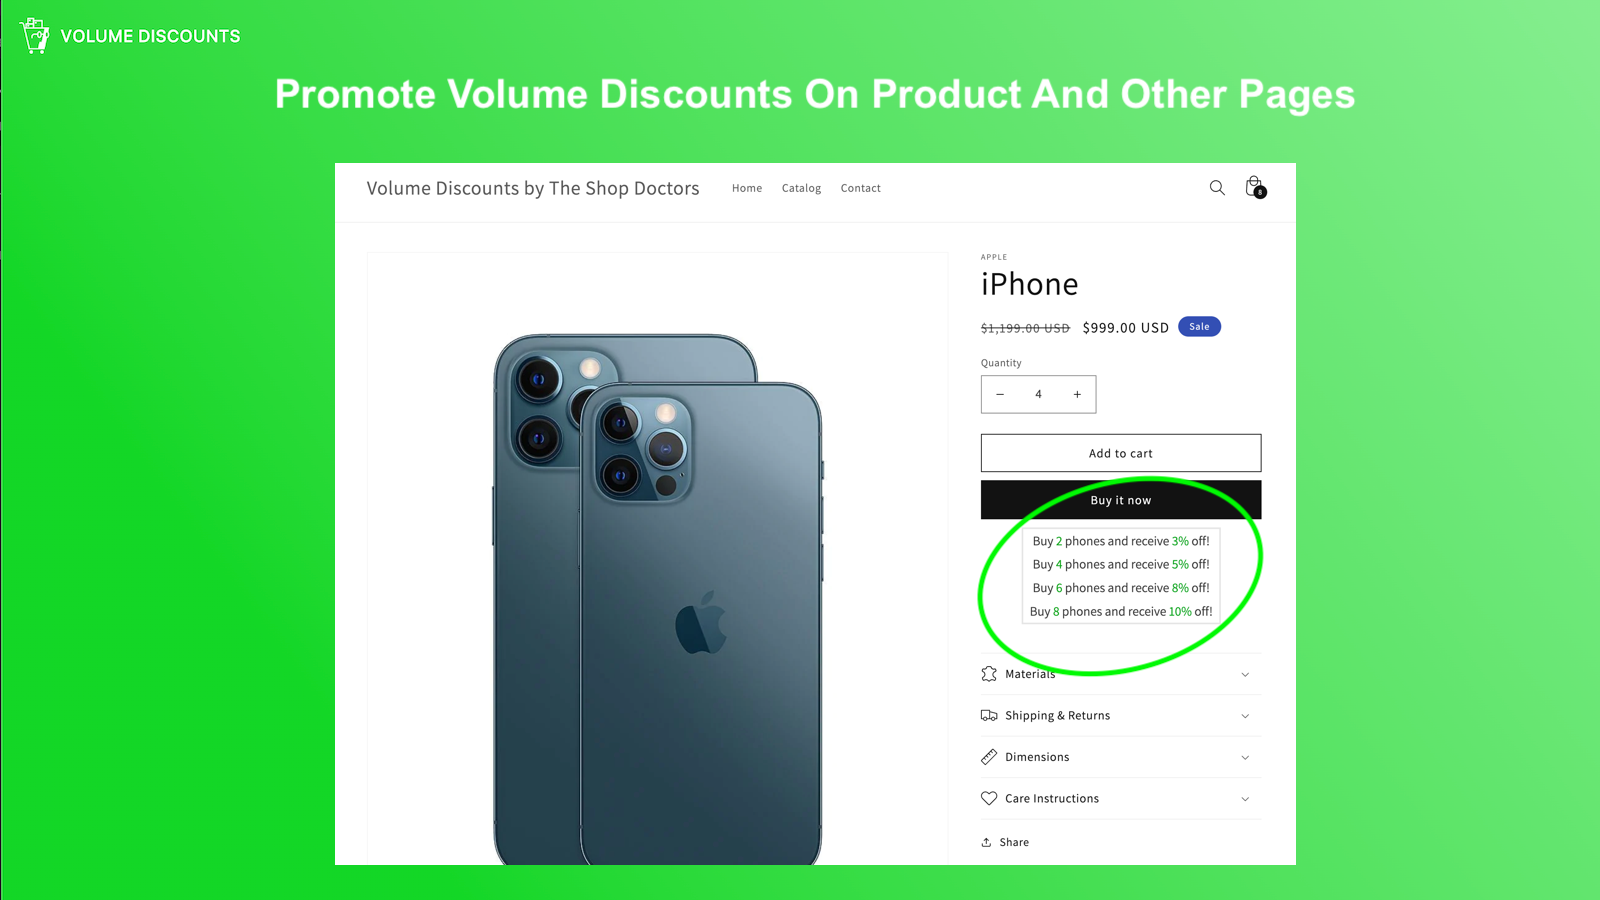 Promote Volume Discounts On Product And Other Pages